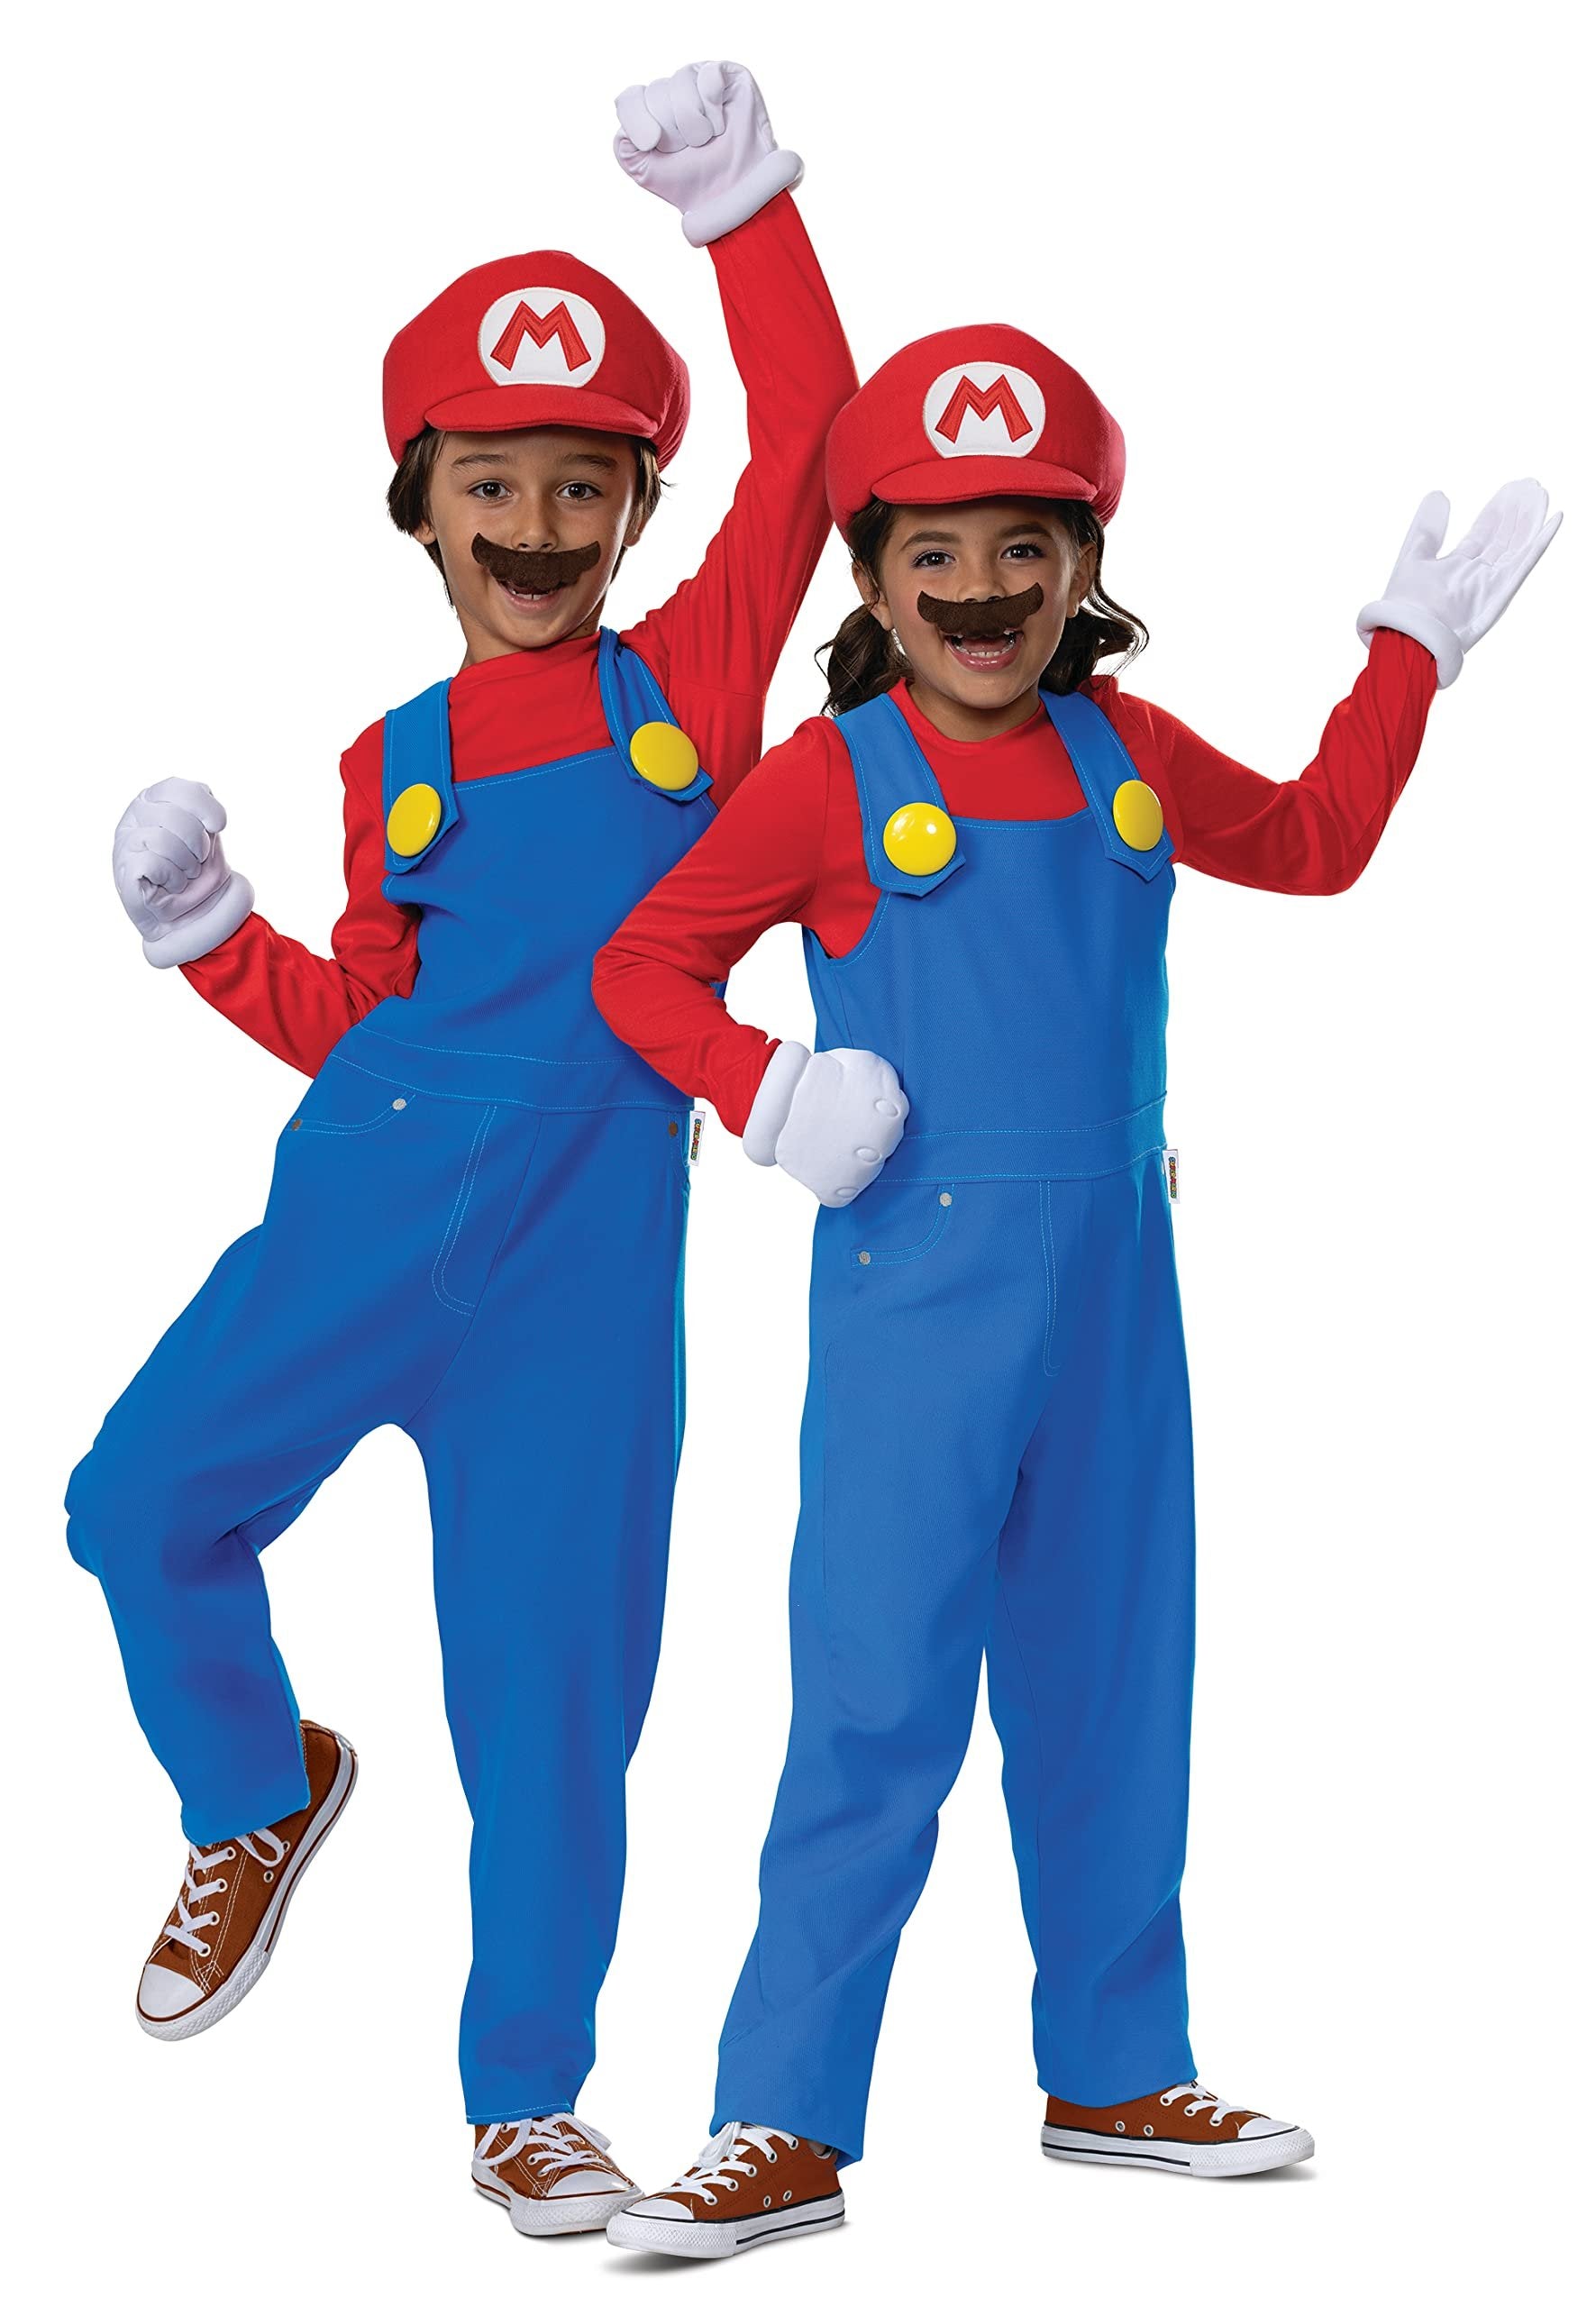 Disguise Mario Costume for Kids, Official Super Mario Bros Costume and Accessories for Children, Size (7-8)